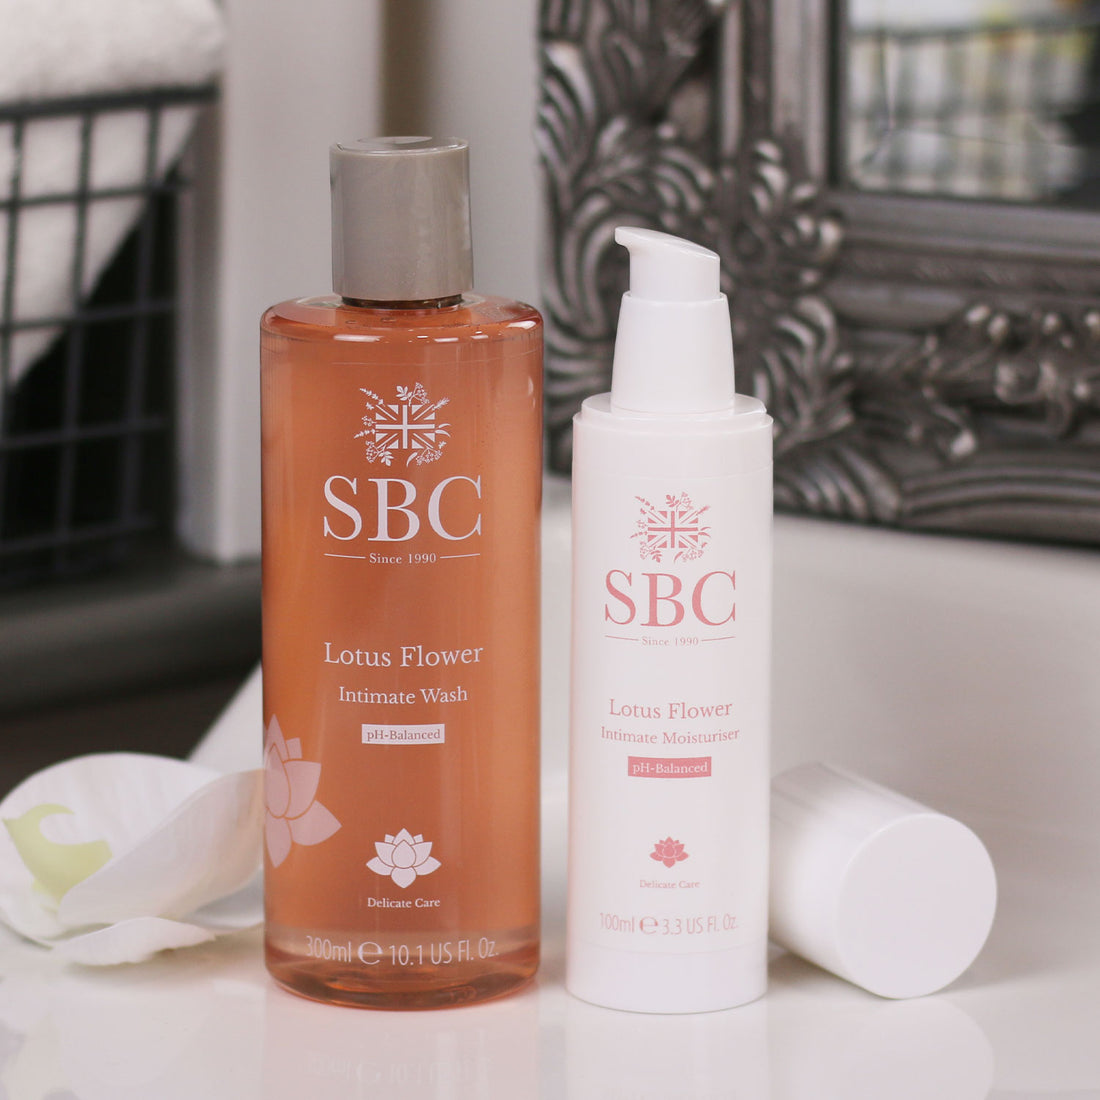 SBC’s Intimate Products for Menopause